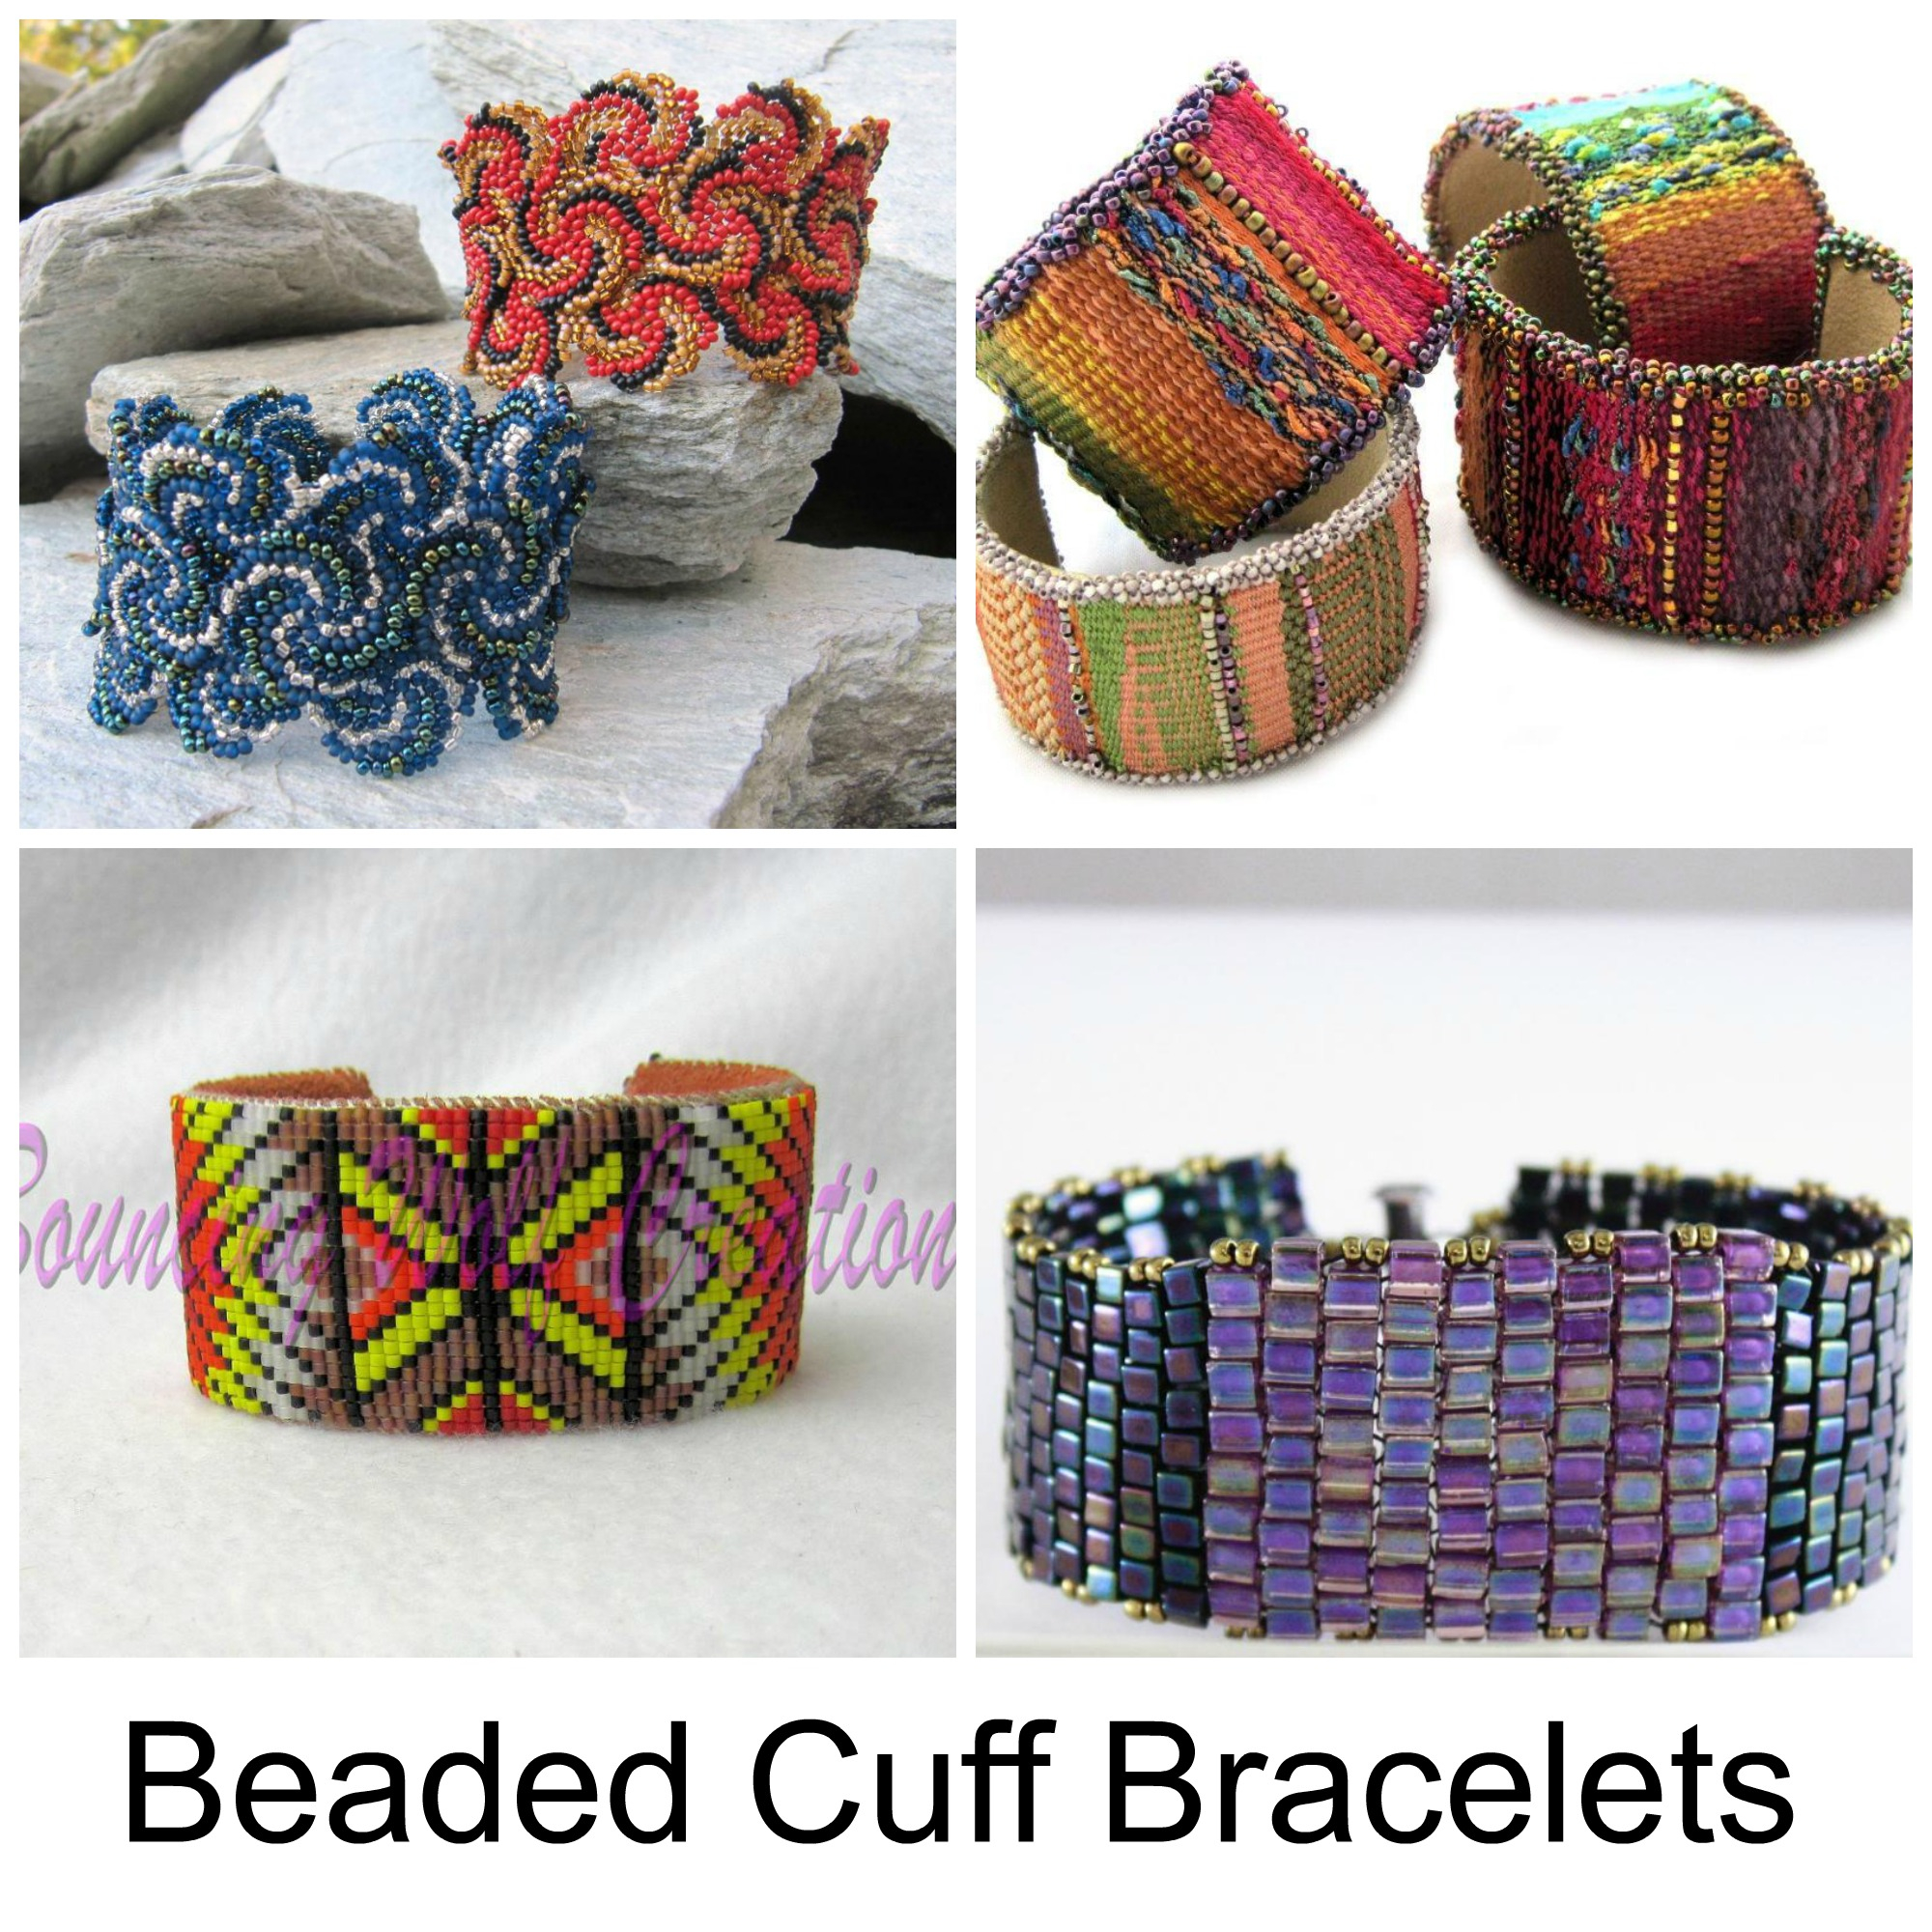 Bead Embroidery Jewelry Patterns How To Make Beaded Cuffs 9 Tutorials To Try